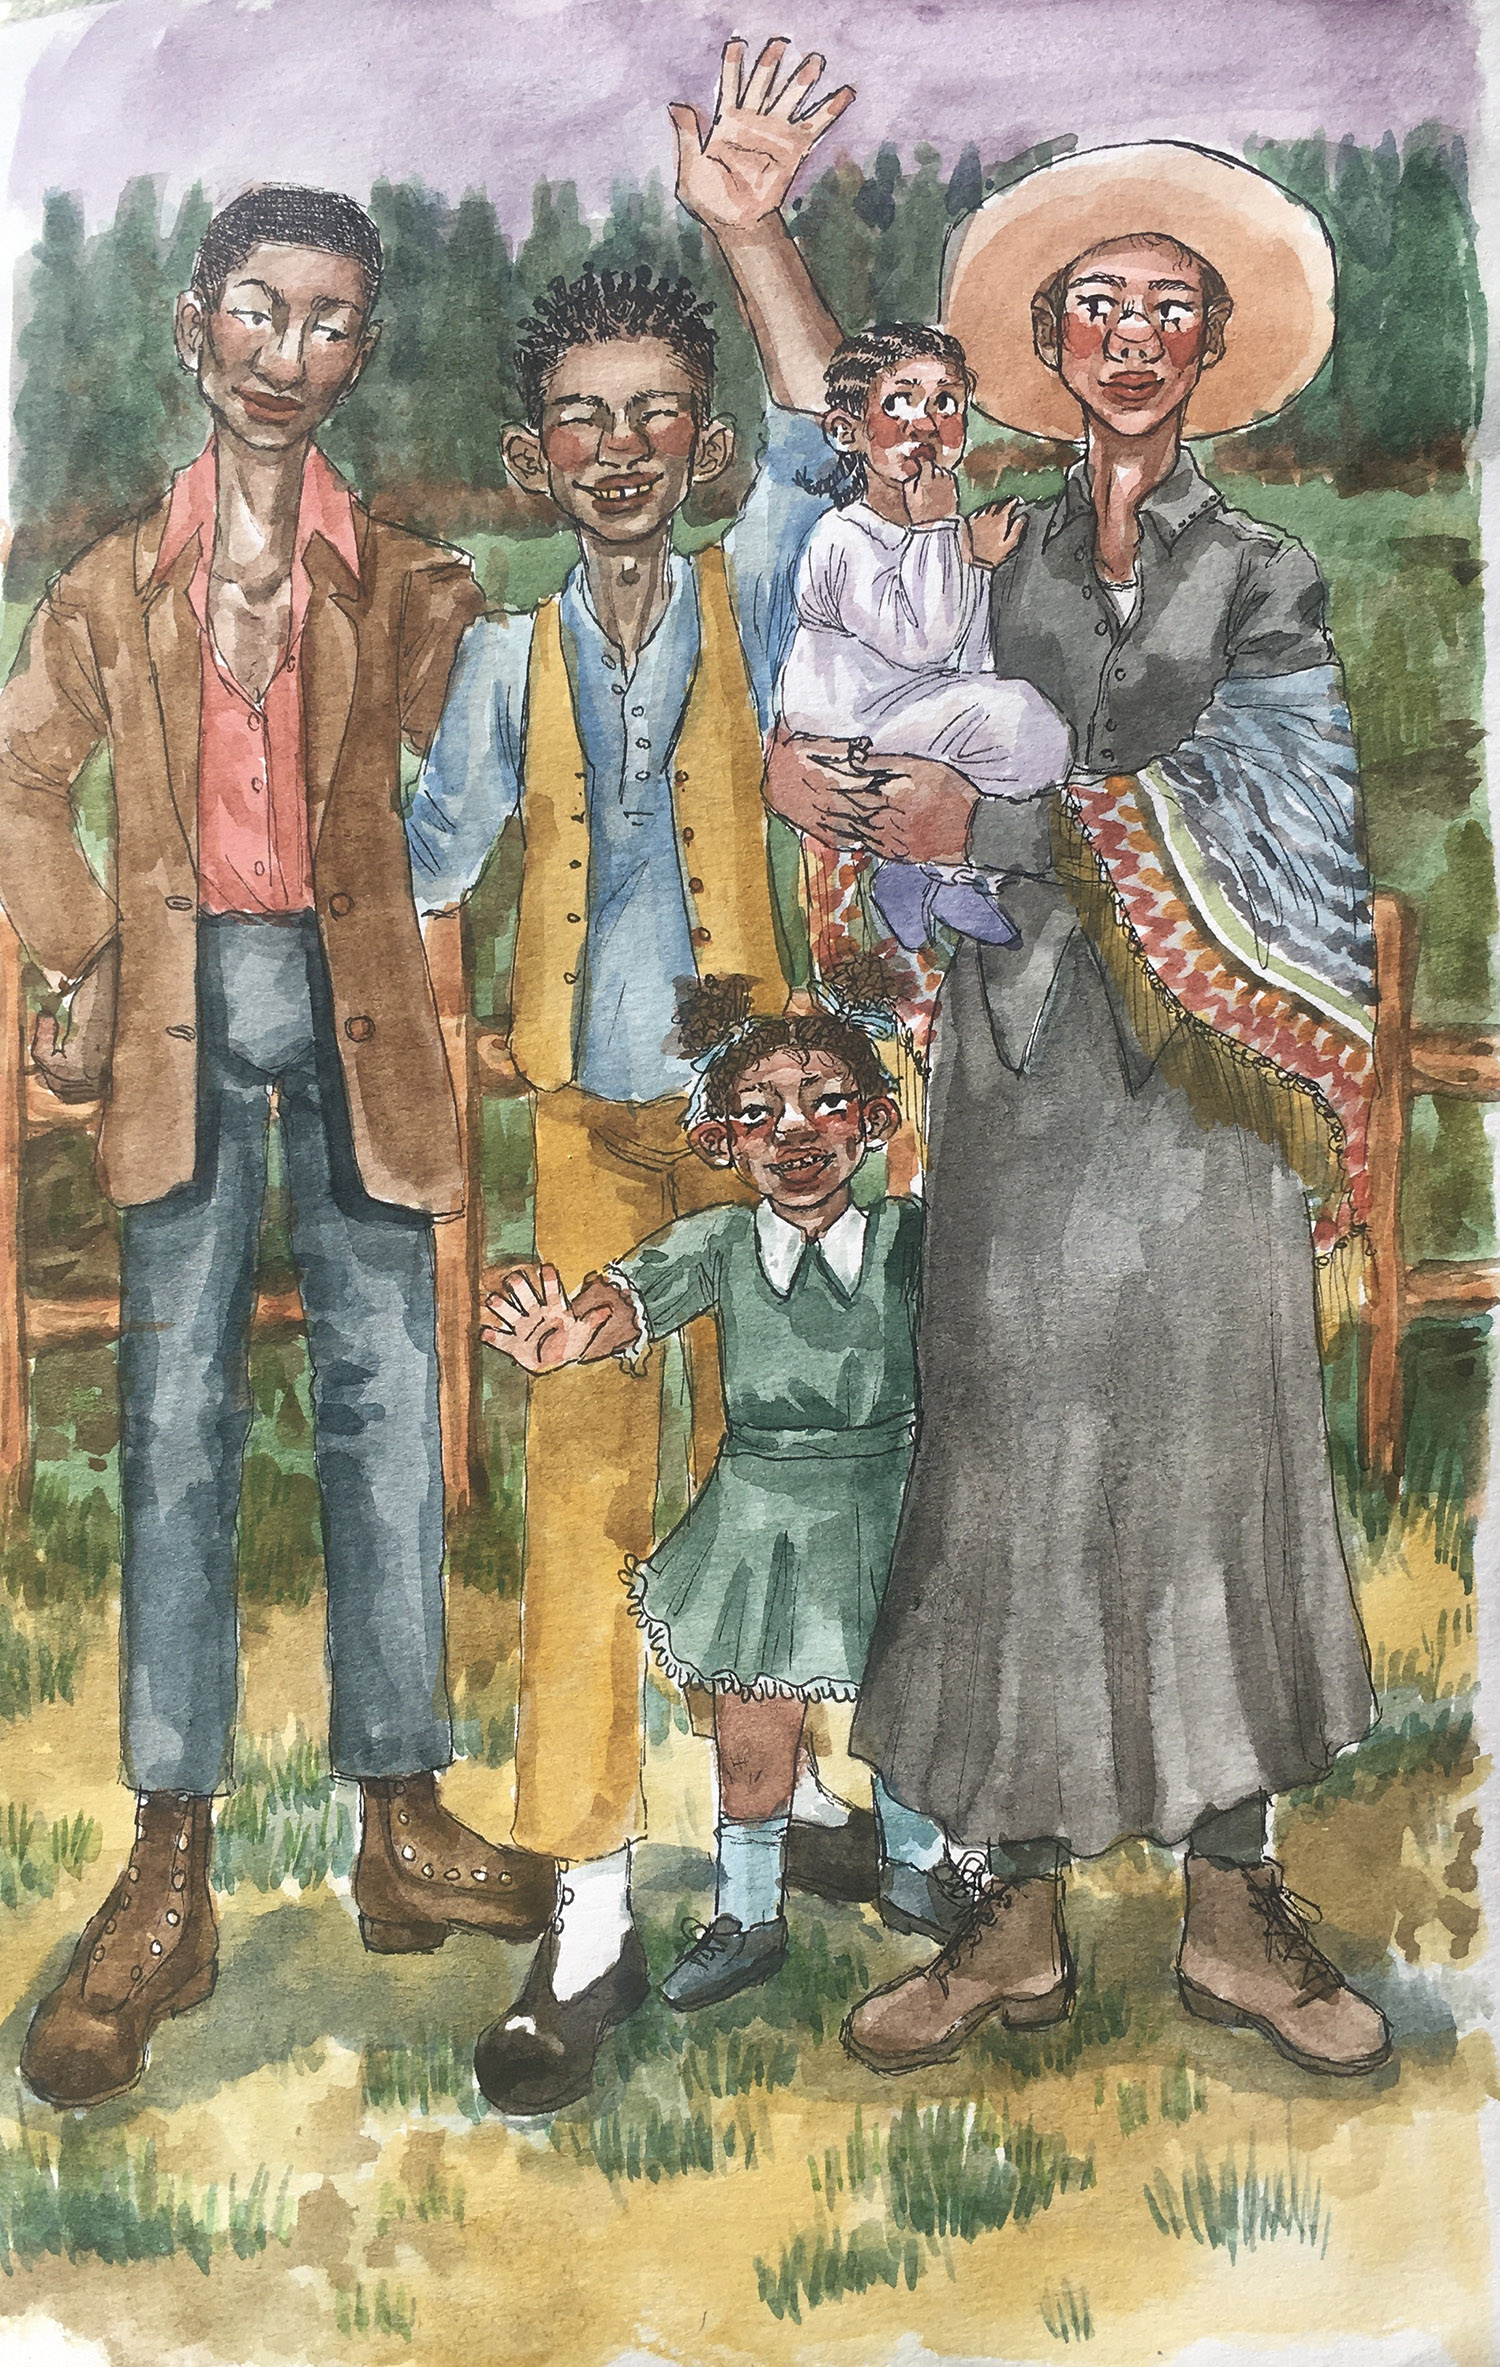 family of five, right to left: mom #1 with short hair in slacks, lanky teenage boy in work clothes, young girl with pigtails and green dress, mom #2 wearing a dress and shawl holding young toddler boy in a frock.